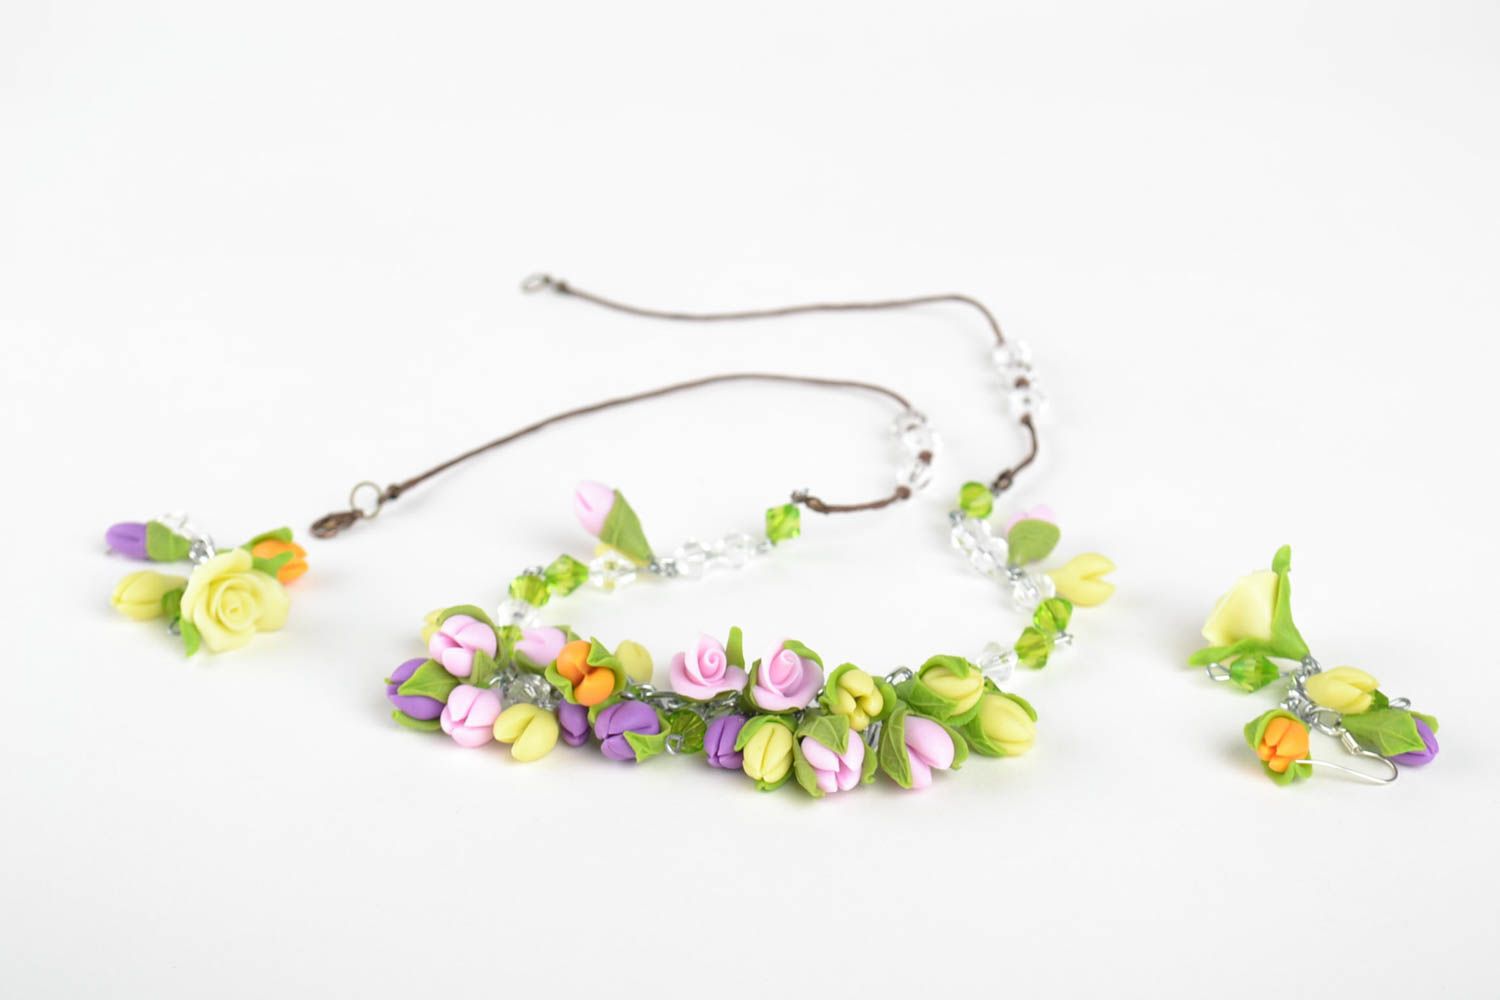 Handmade earrings and necklace with flowers designer floral bijouterie set photo 4